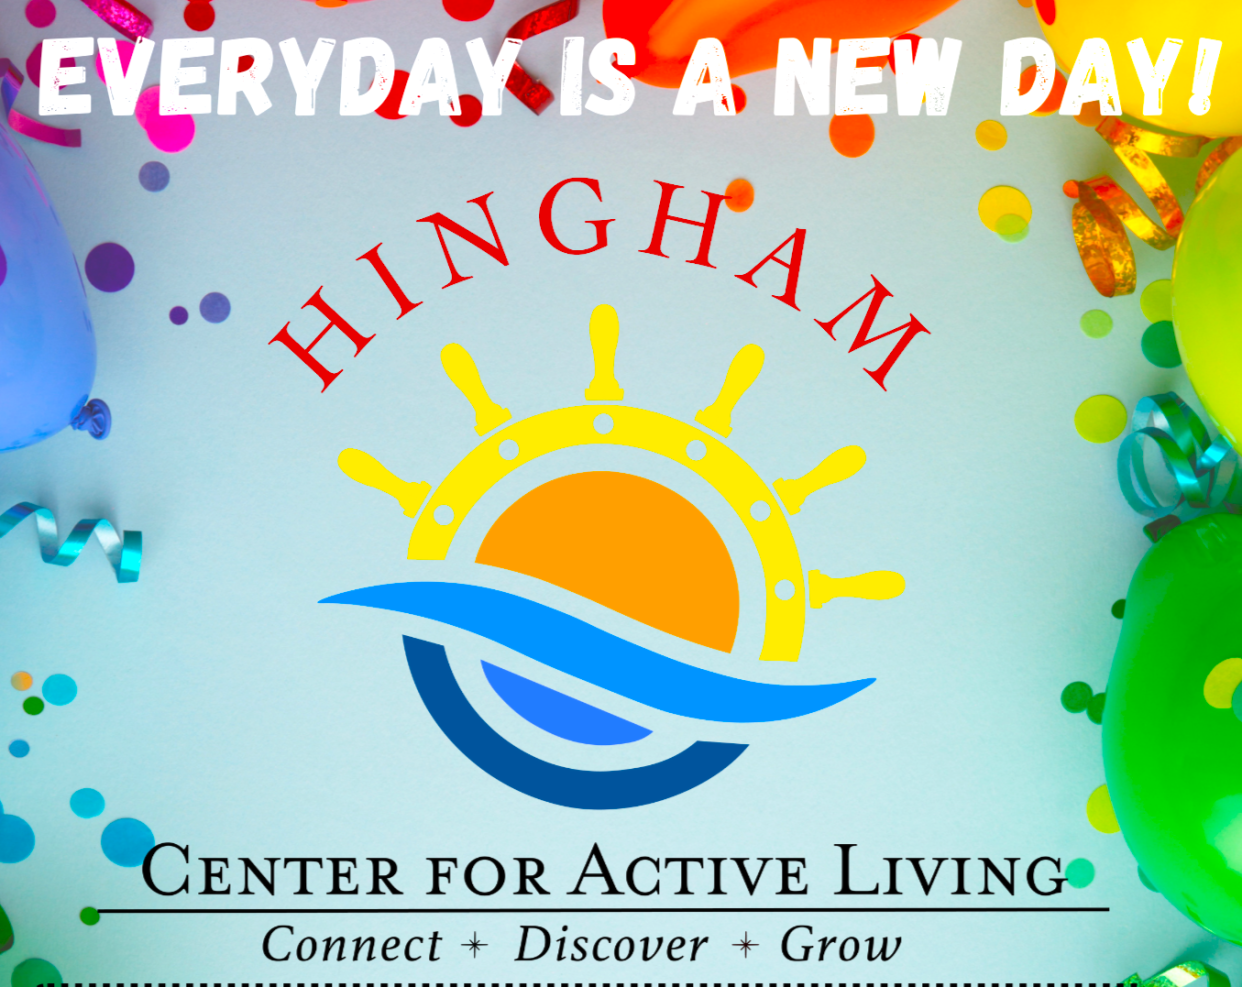 Hingham's Center for Active Living has a new logo emphasizing new beginnings. The former senior center is appealing to more younger members.